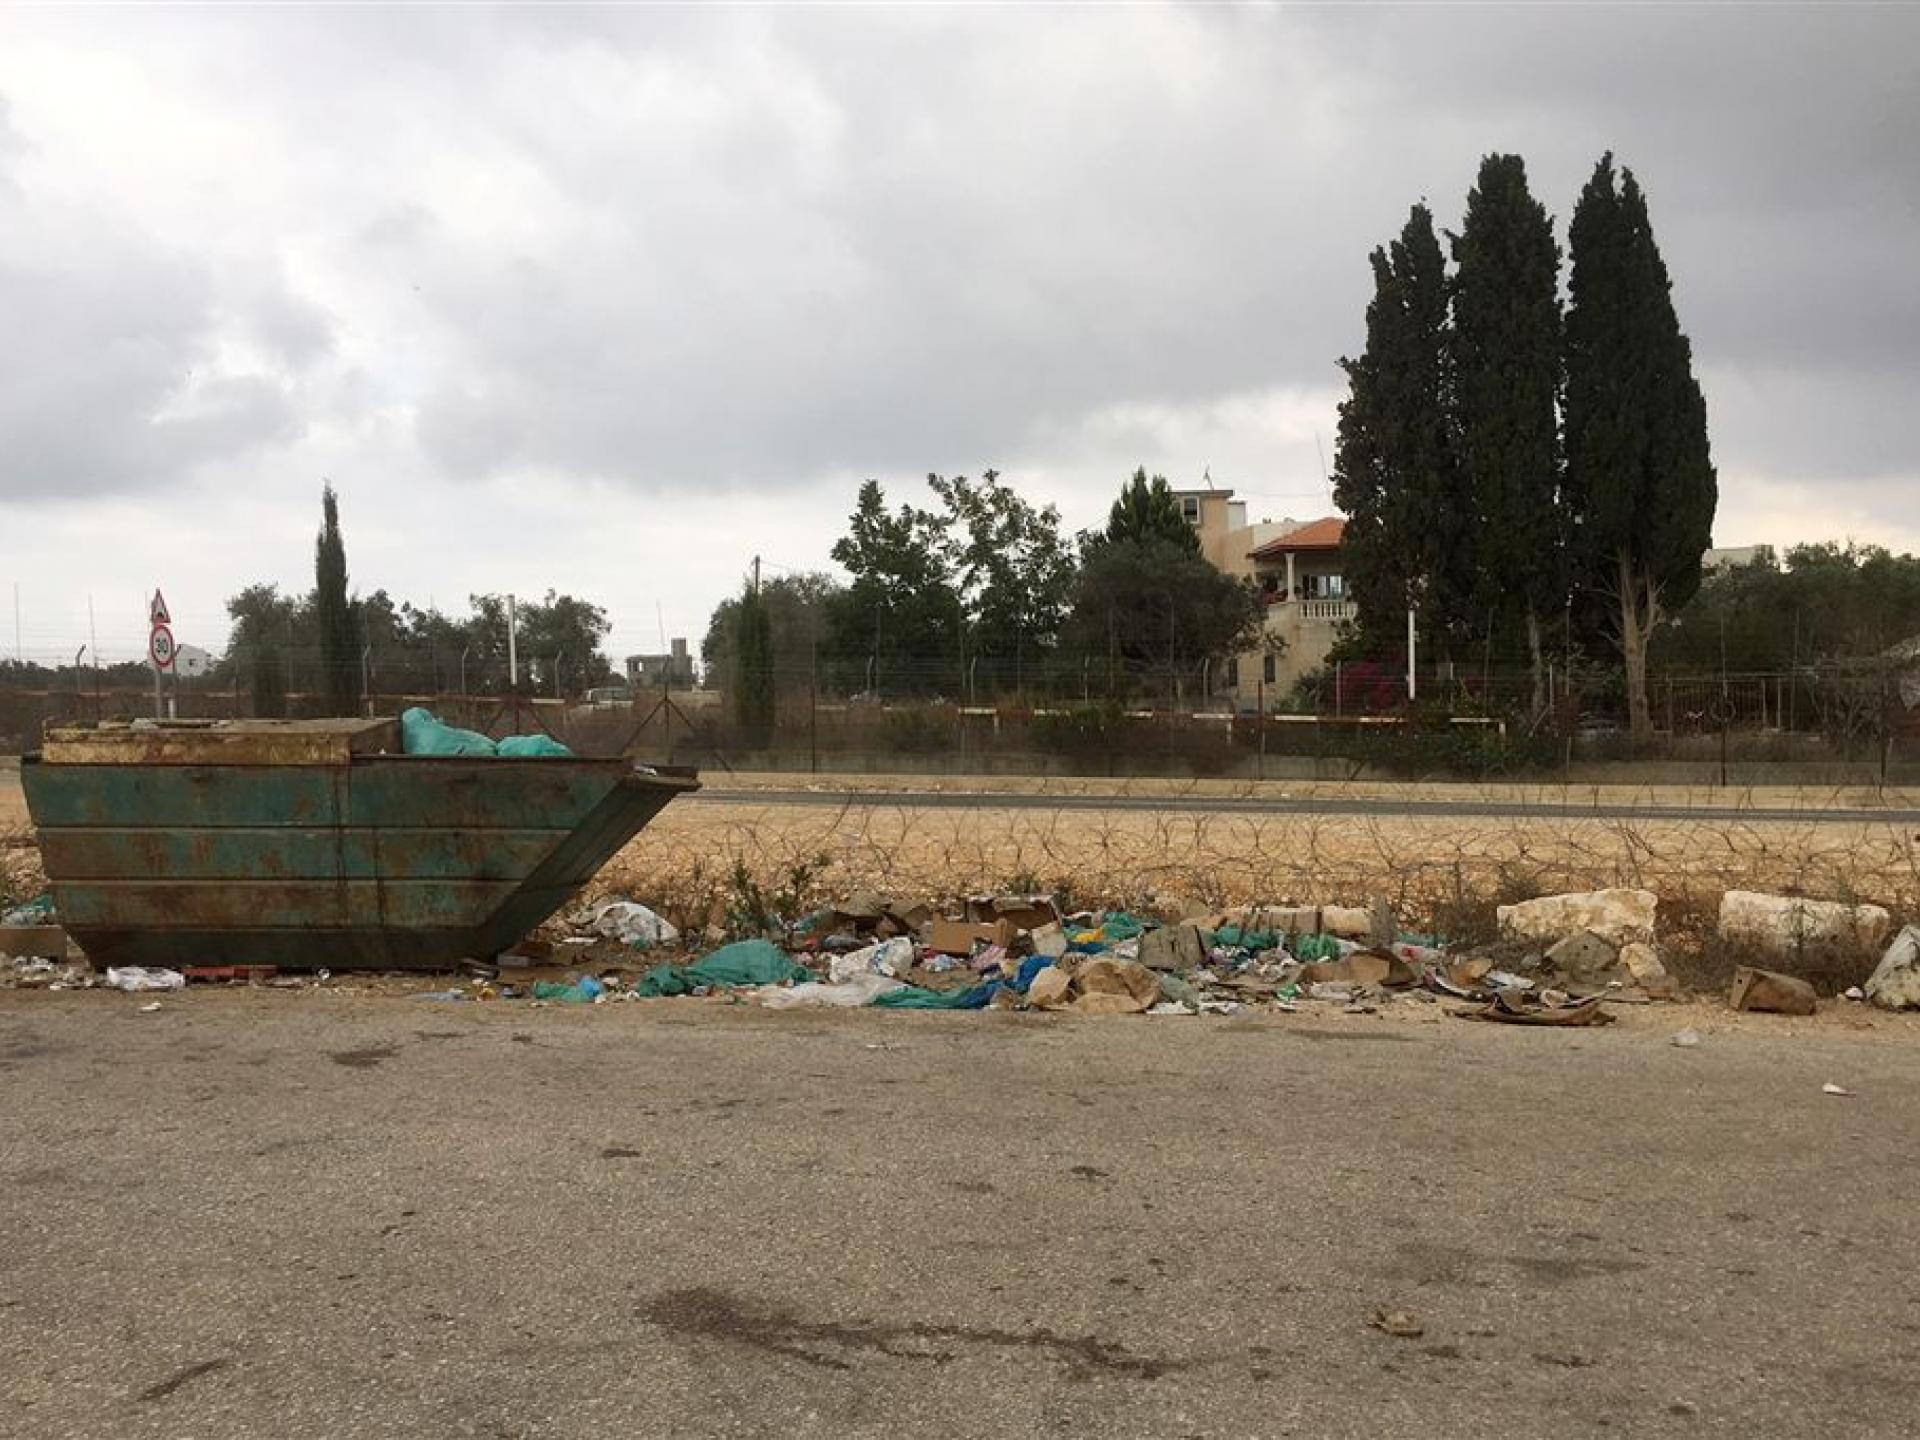 Tura – Shaked Checkpoint: The IDF is responsible for the permanent garbage dump at the entrance to the checkpoint.